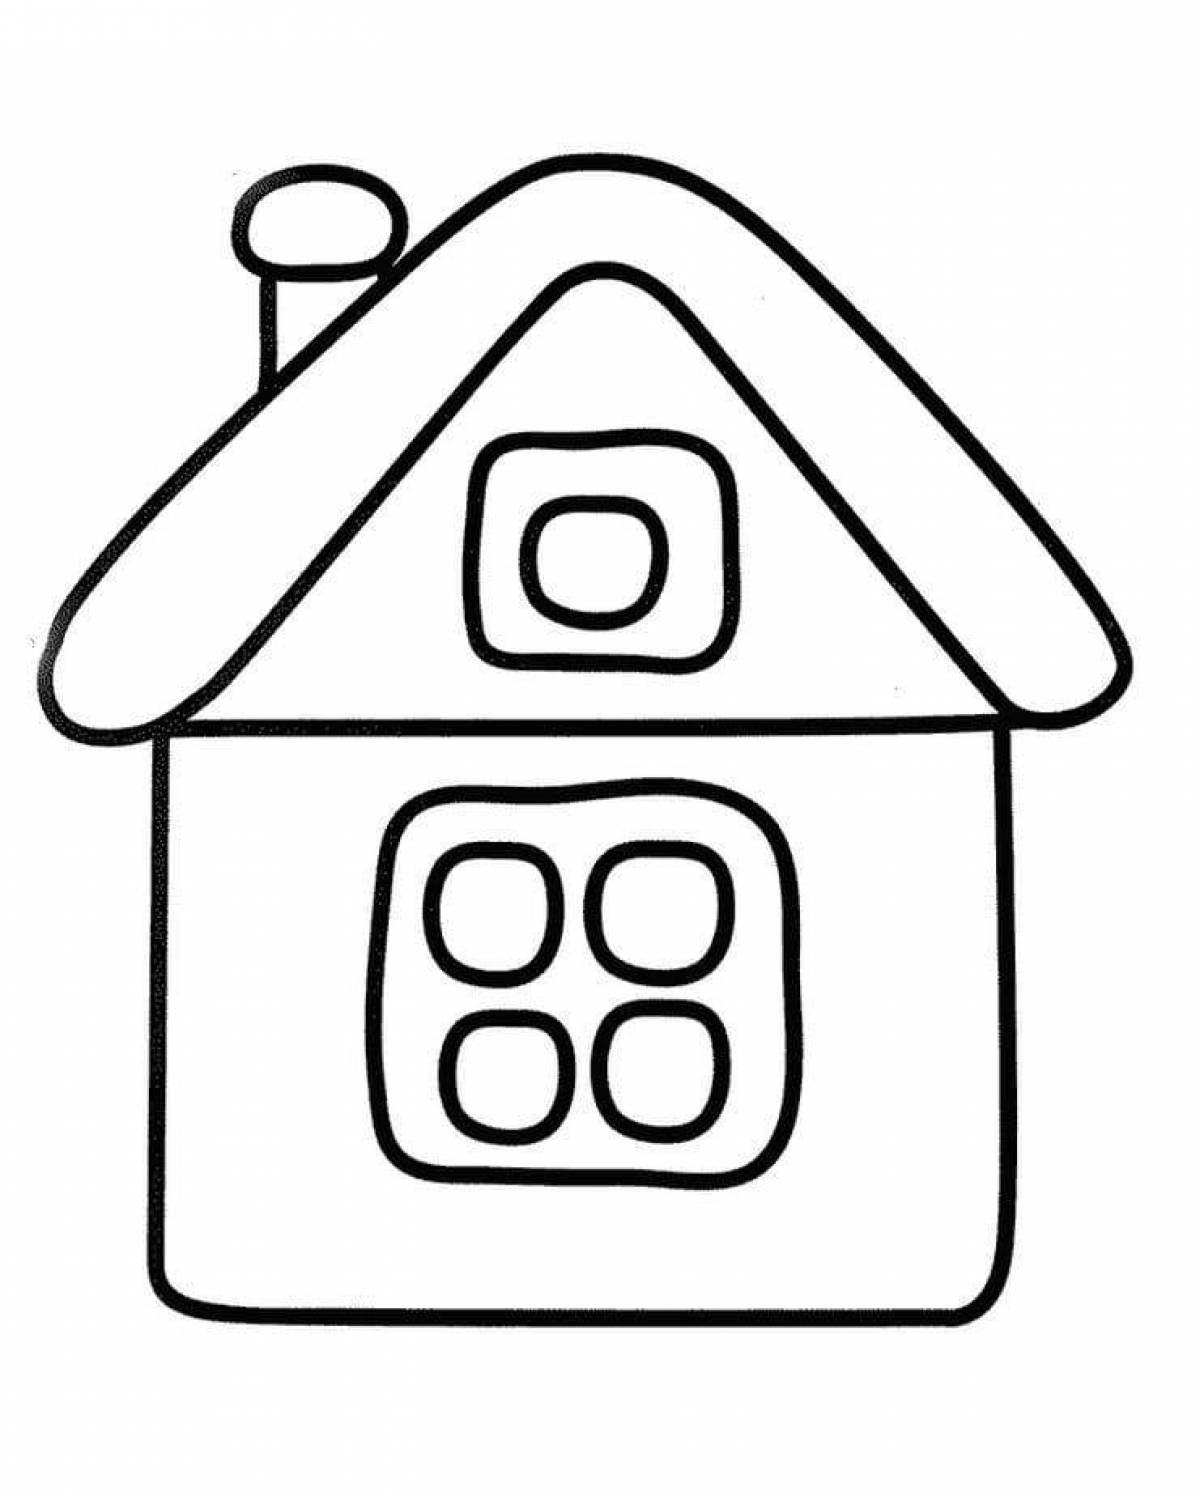 Coloring pages cute houses for kids 5-6 years old